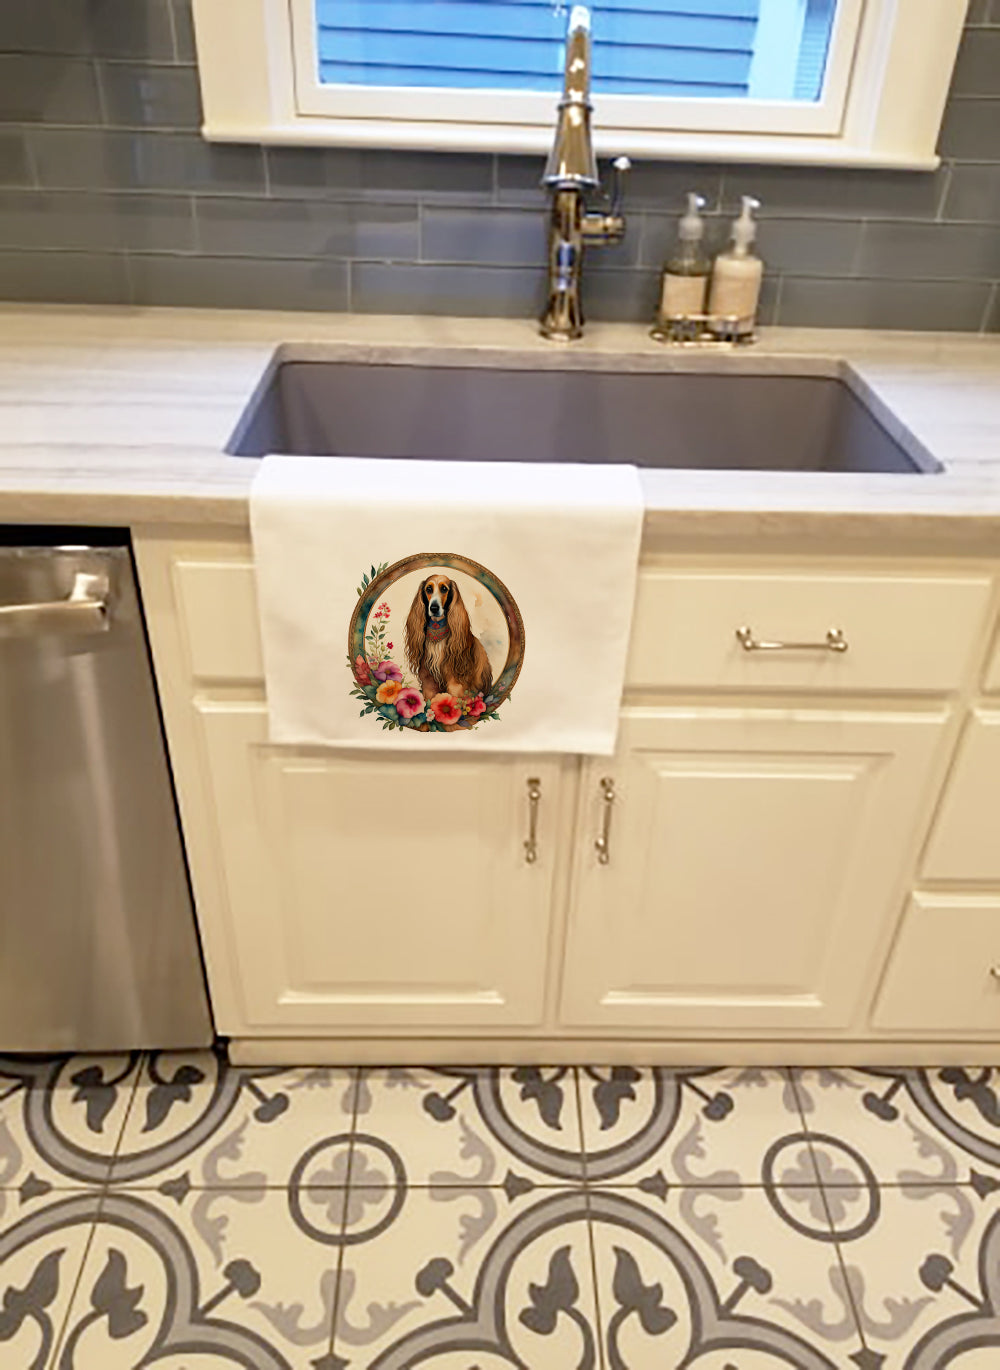 Buy this Afghan Hound and Flowers Kitchen Towel Set of 2